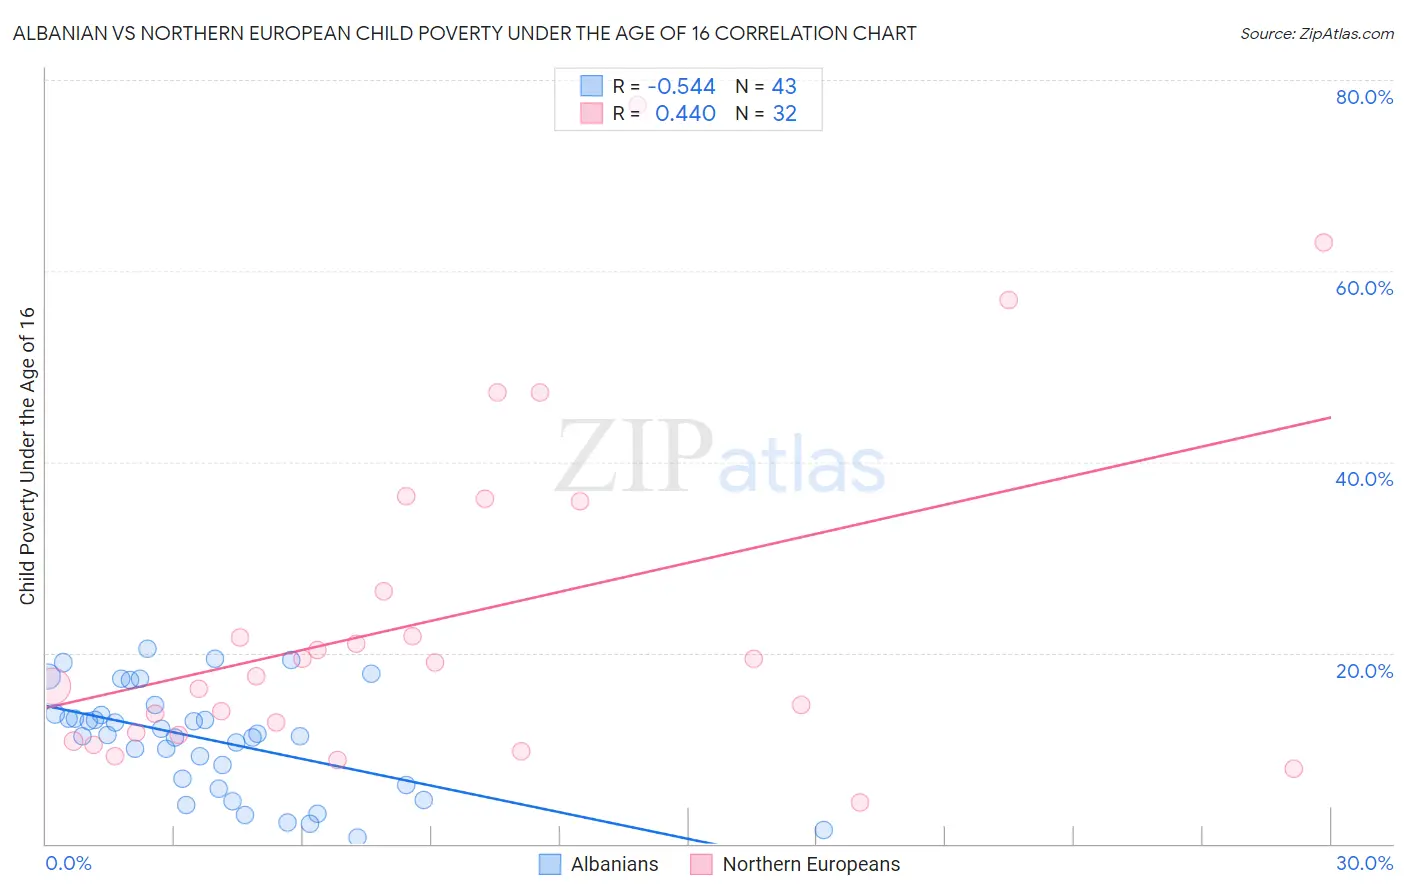 Albanian vs Northern European Child Poverty Under the Age of 16